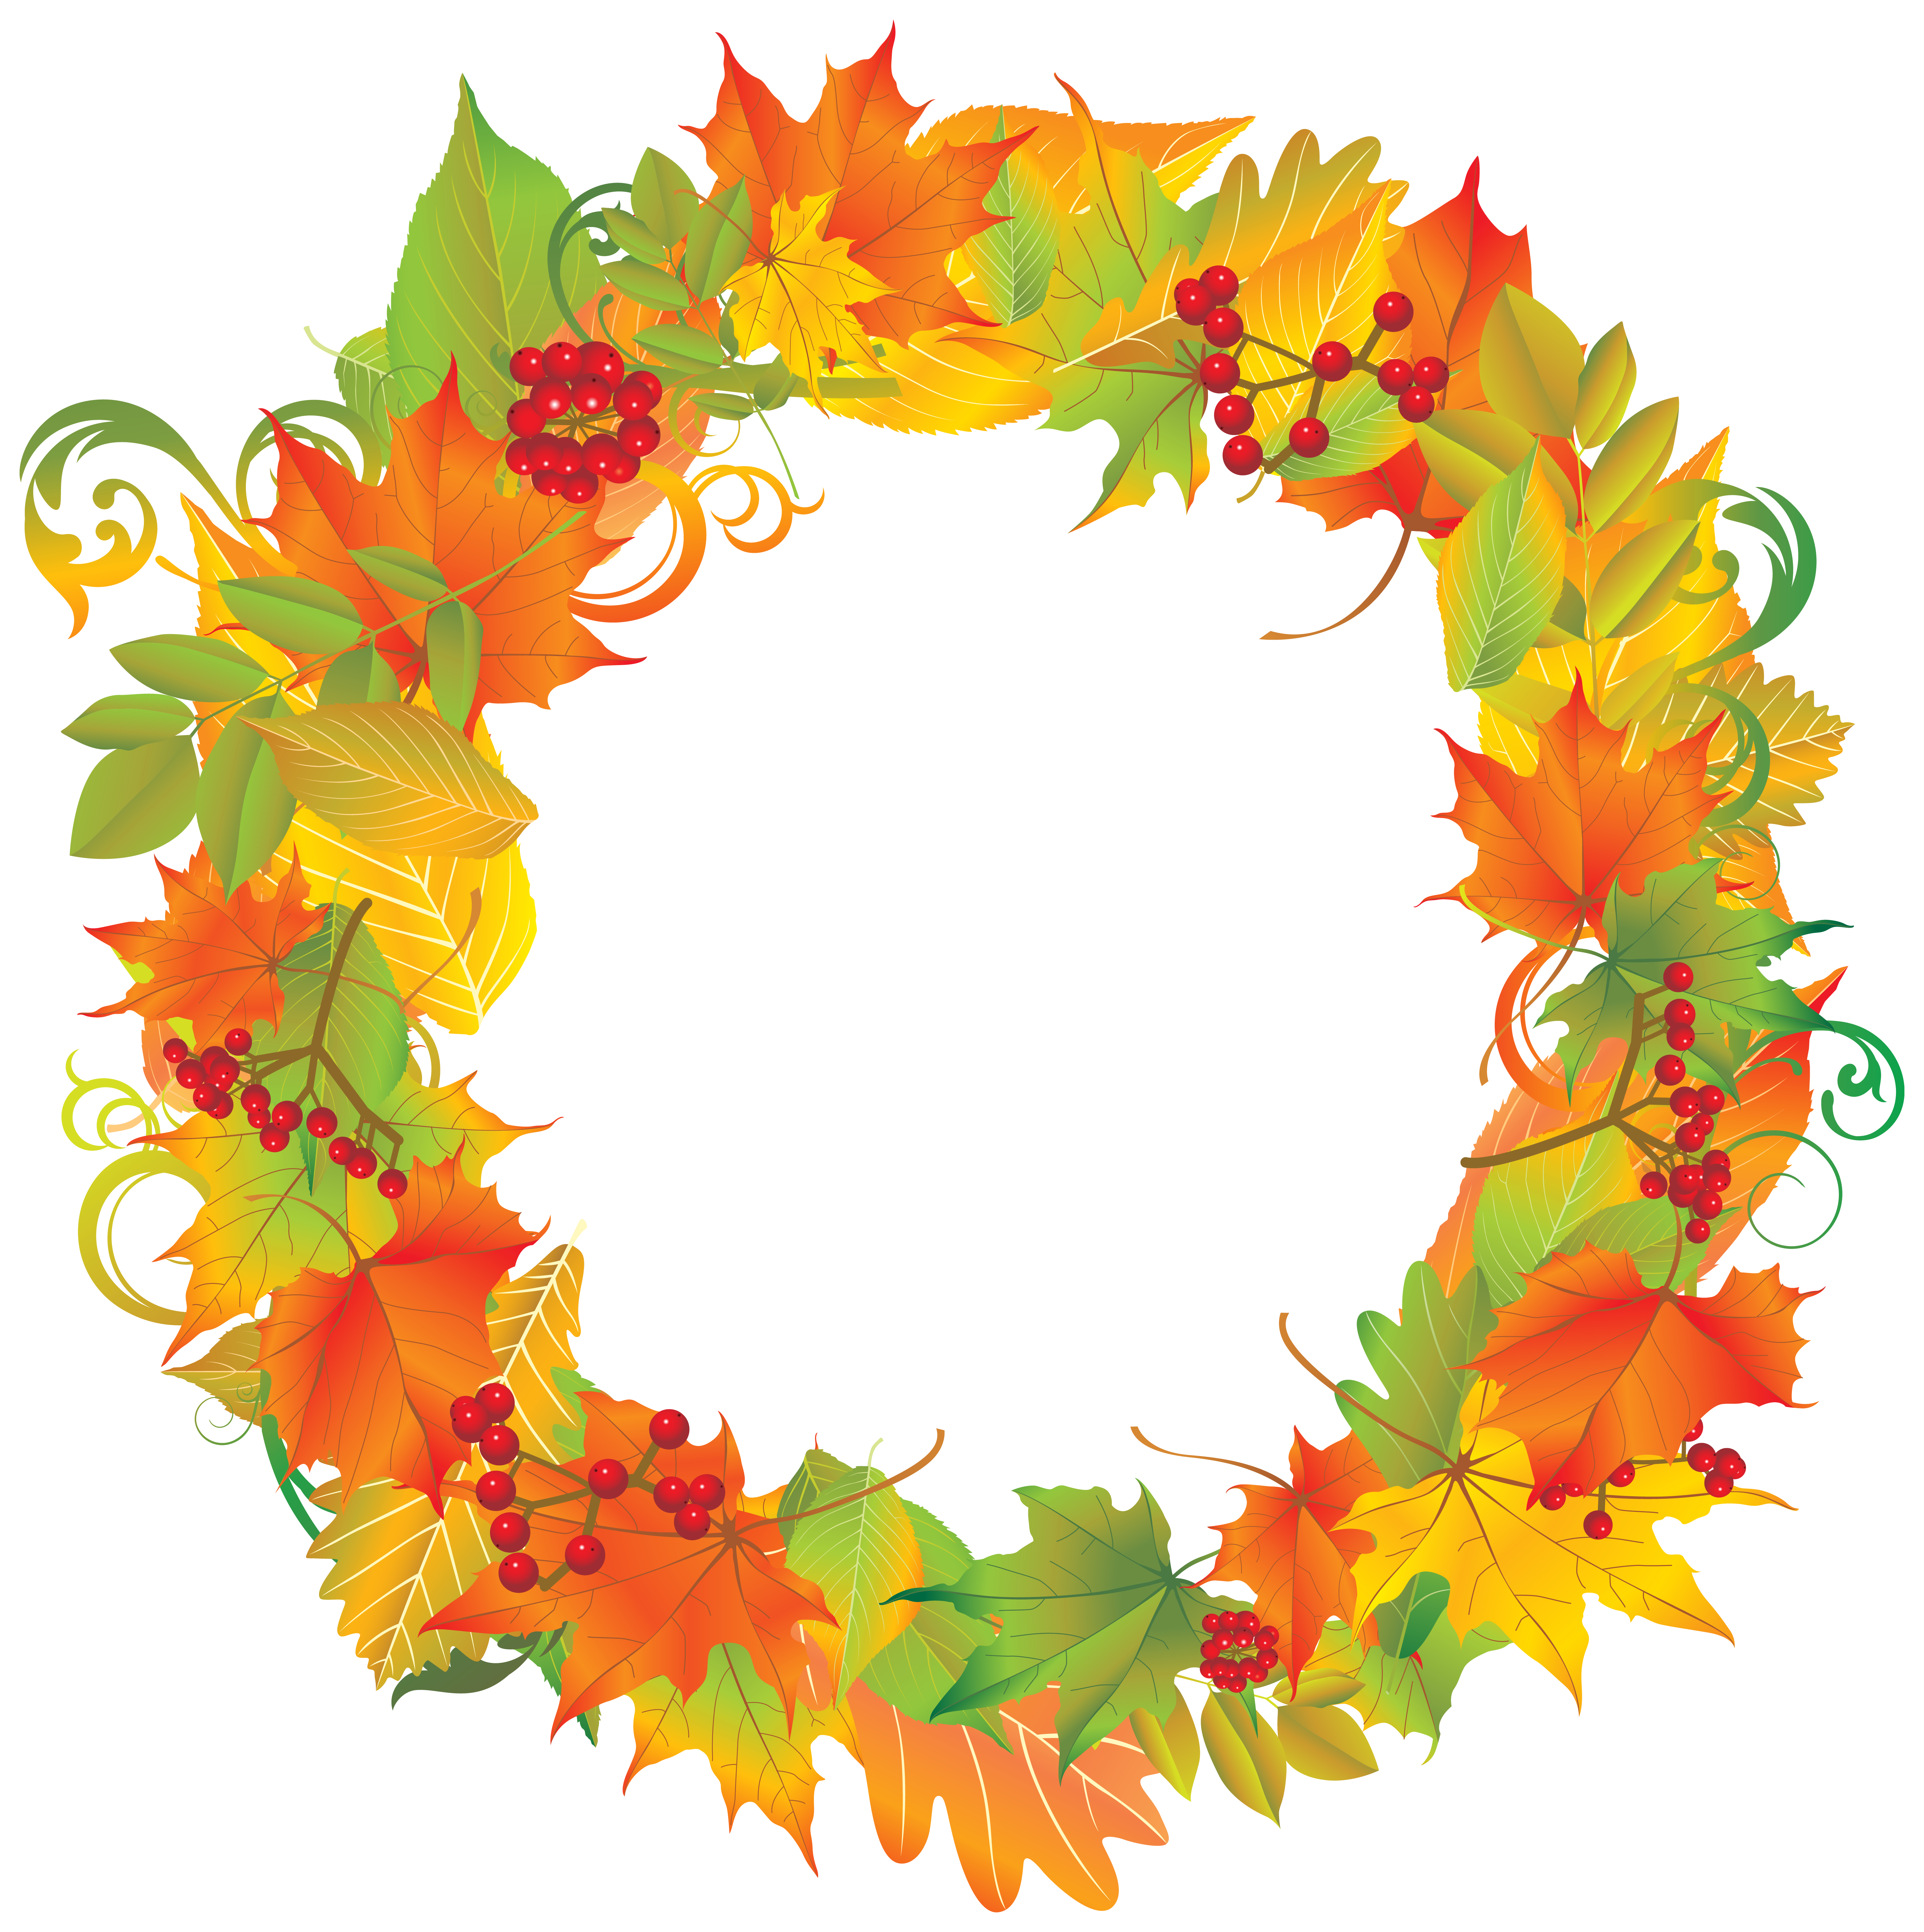 Autumn Wreath PNG Clipart Image​ | Gallery Yopriceville - High-Quality Free  Images and Transparent PNG Clipart